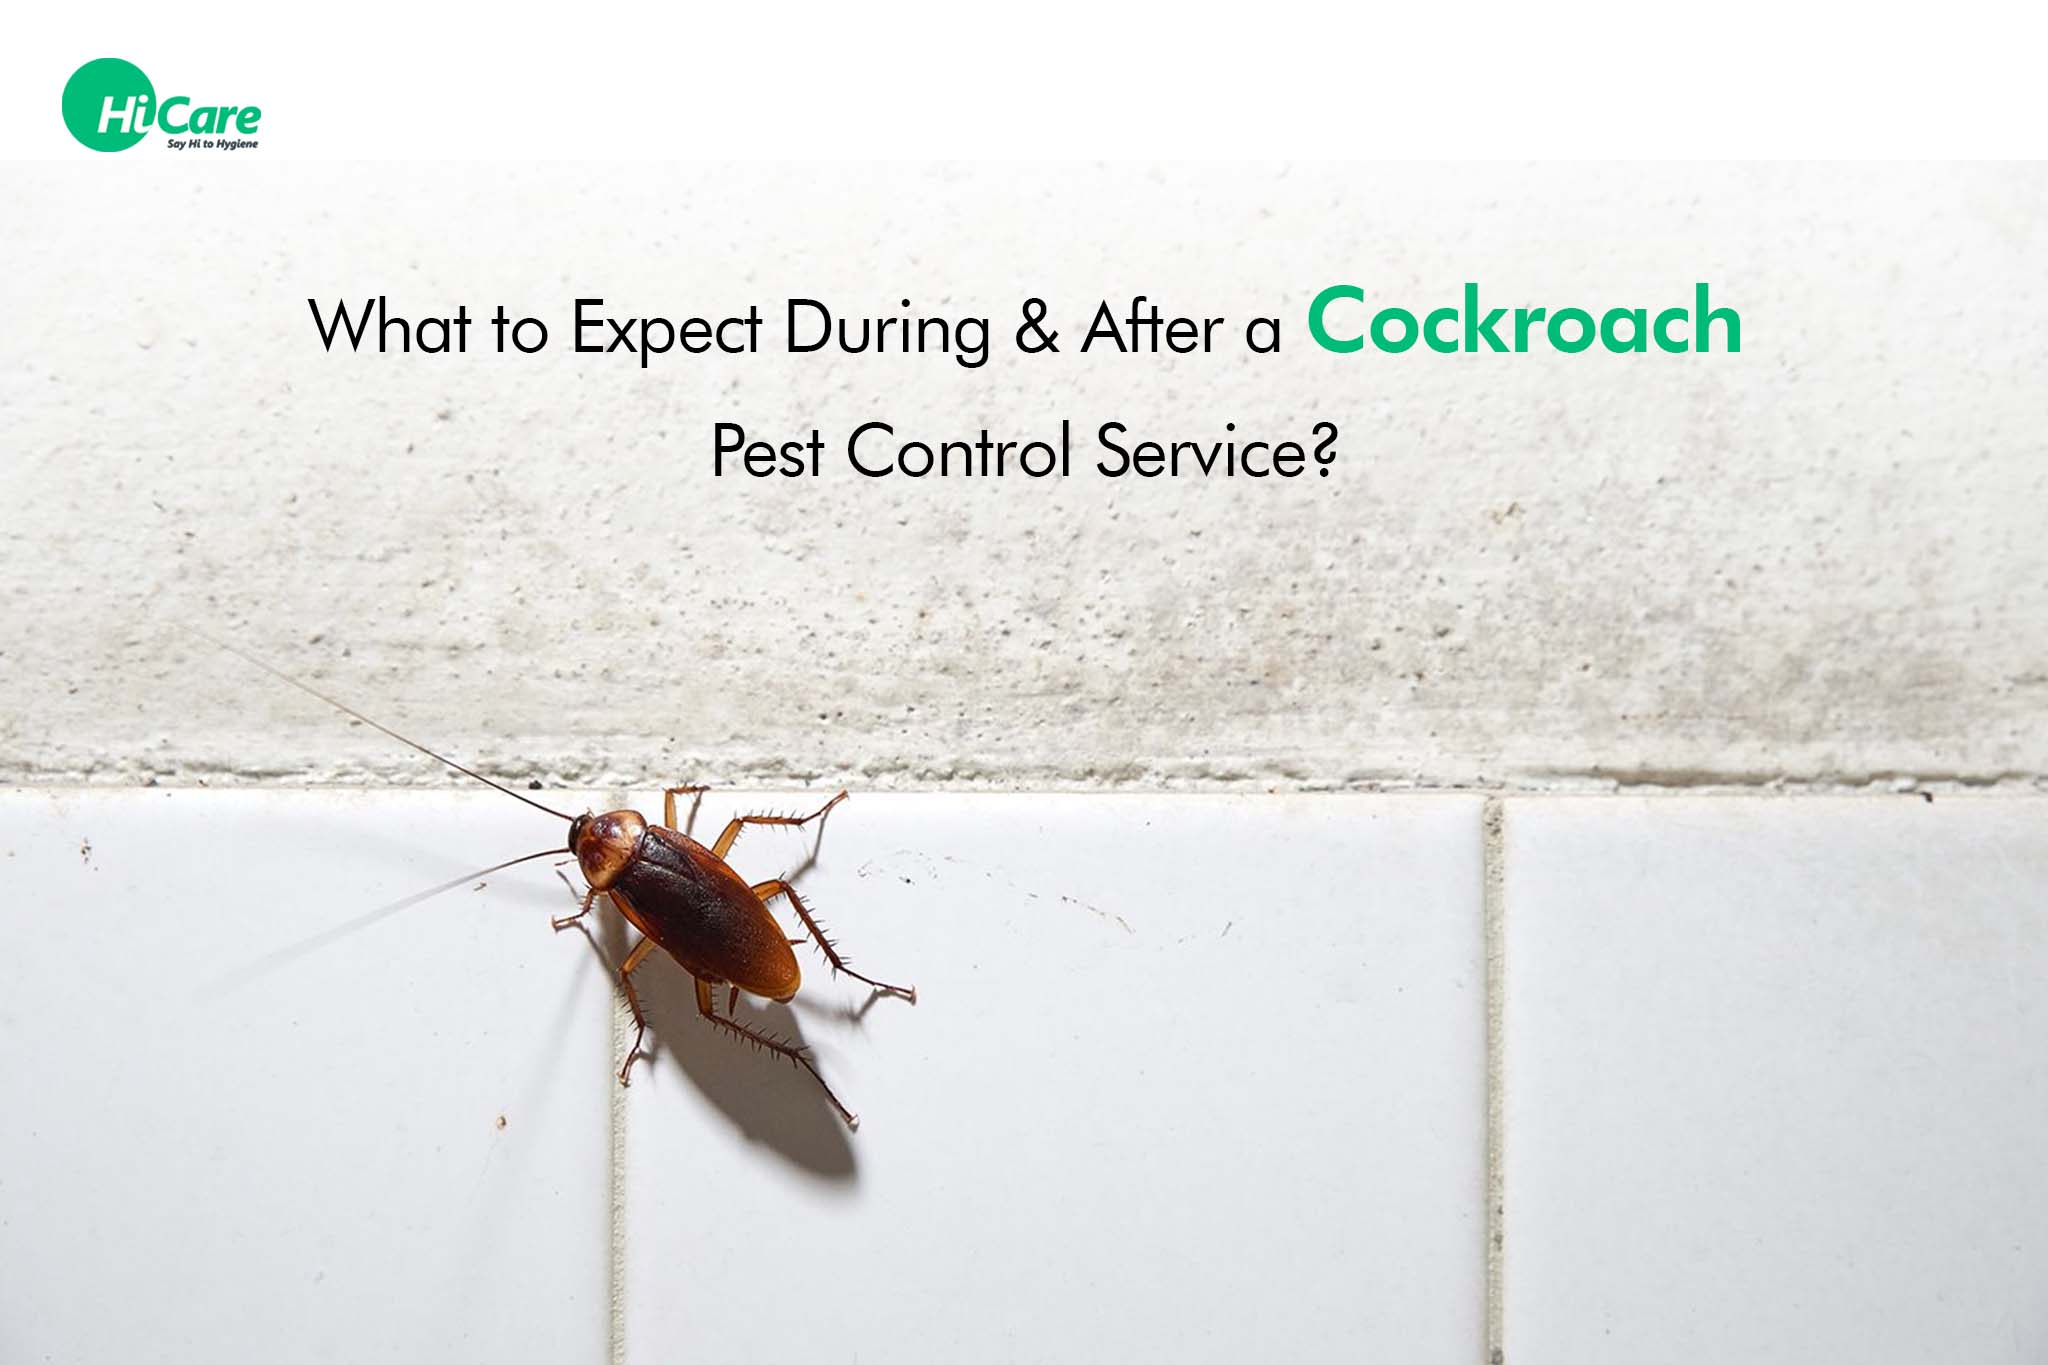 What to Expect During and After Cockroach Pest Control Treatment | HiCare